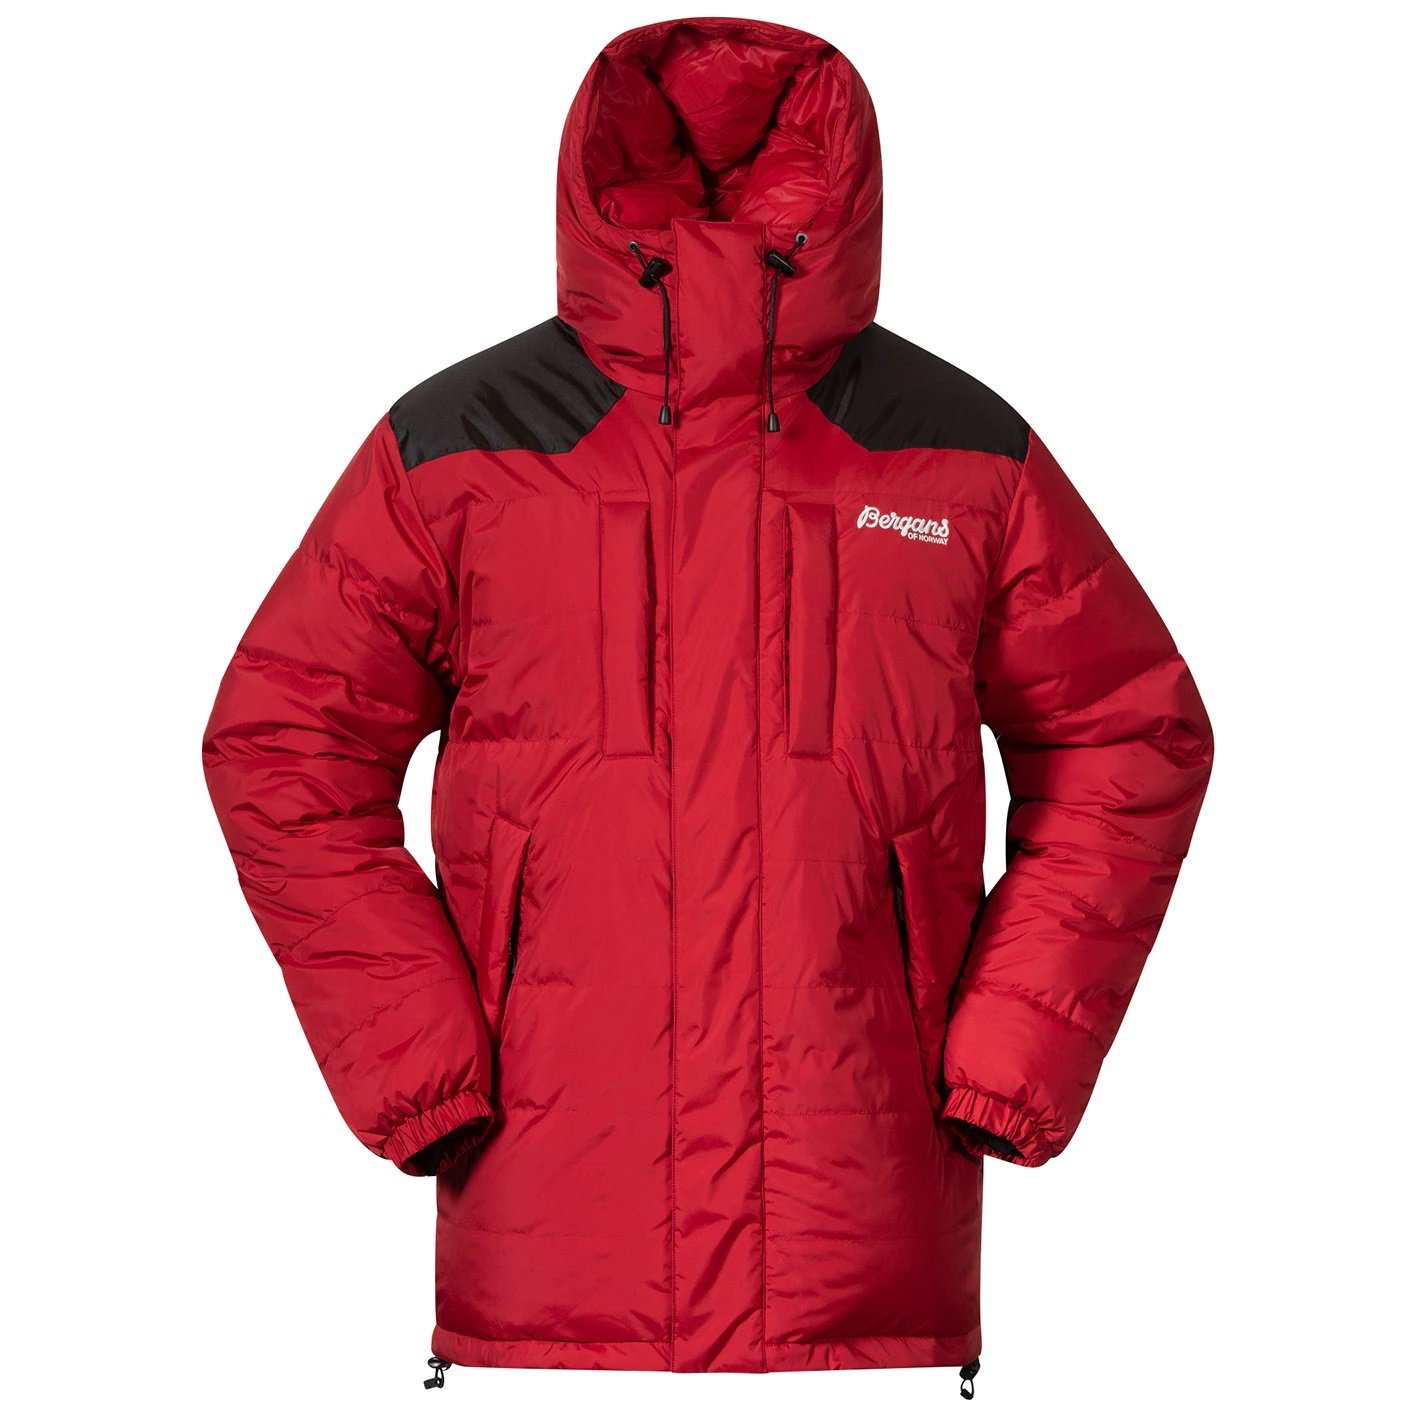 Bergans of Norway Expedition Down Unisex Parka in Red Black.jpg